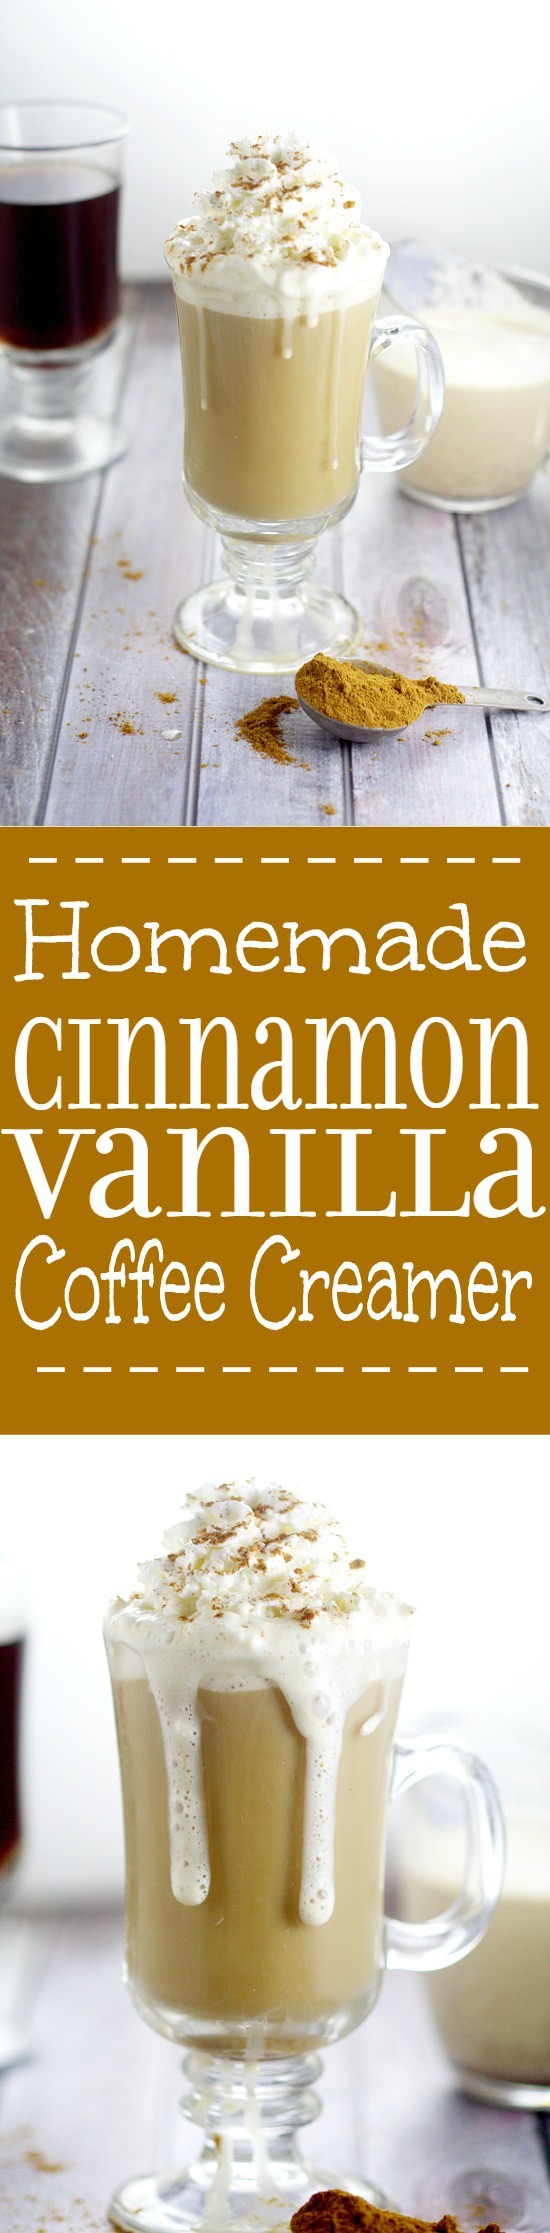 Homemade Cinnamon Vanilla Coffee Creamer recipe.  Frugal and delicious, this spiced, sweet Homemade Cinnamon Vanilla Coffee Creamer recipe will make you look forward to your morning coffee even more.